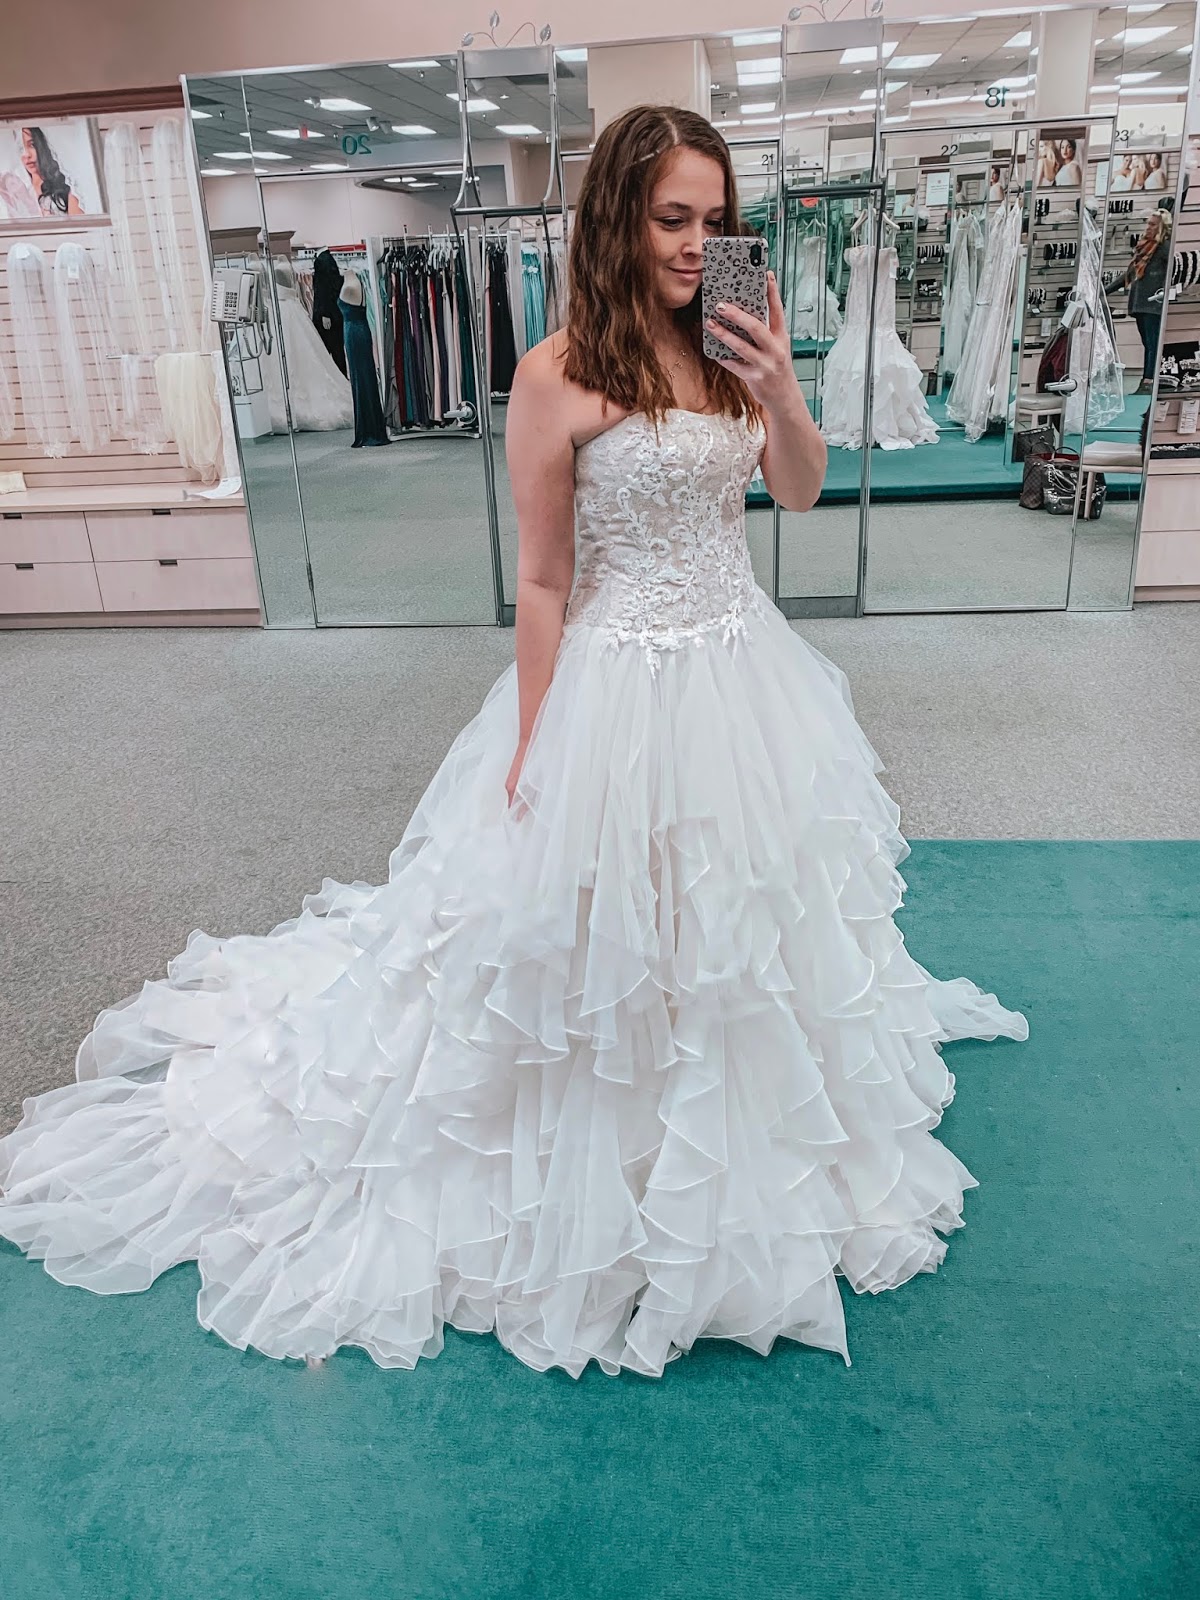 Amazing Wedding Dress Shopping Boston in the world Check it out now 